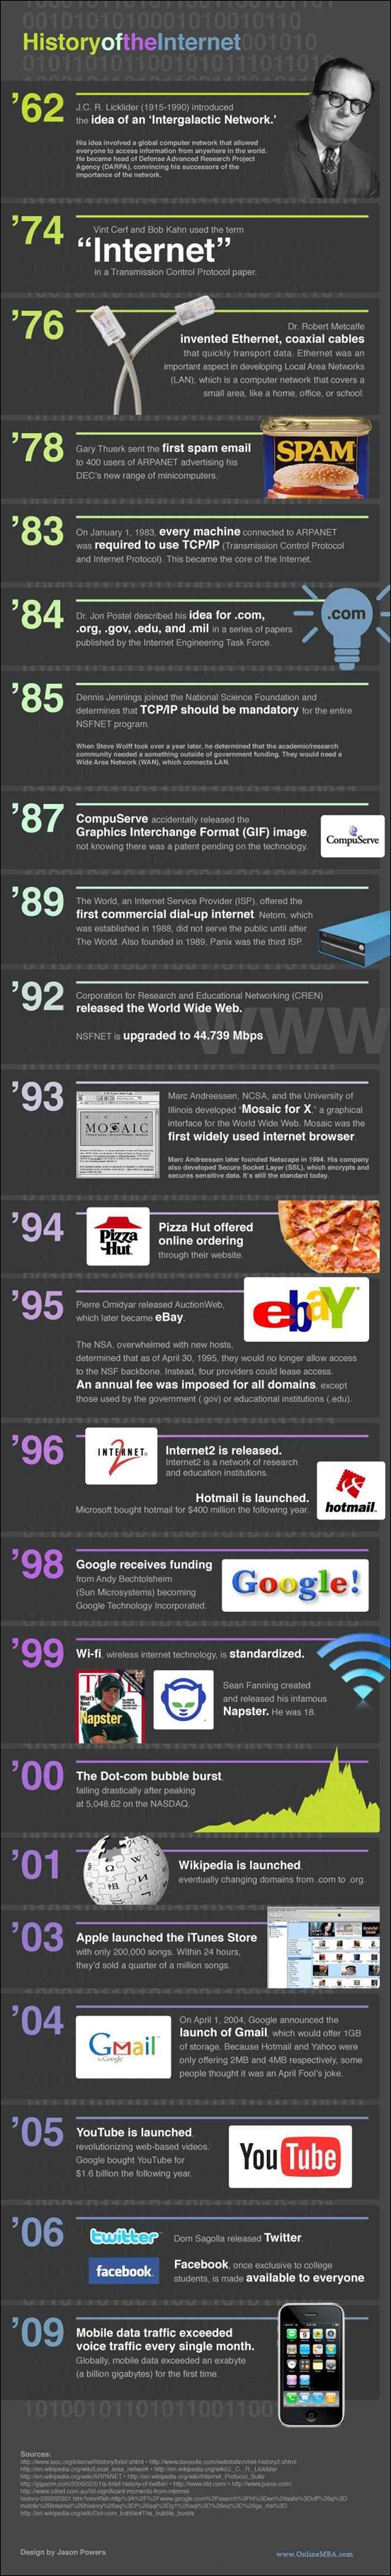 history-of-the-internet